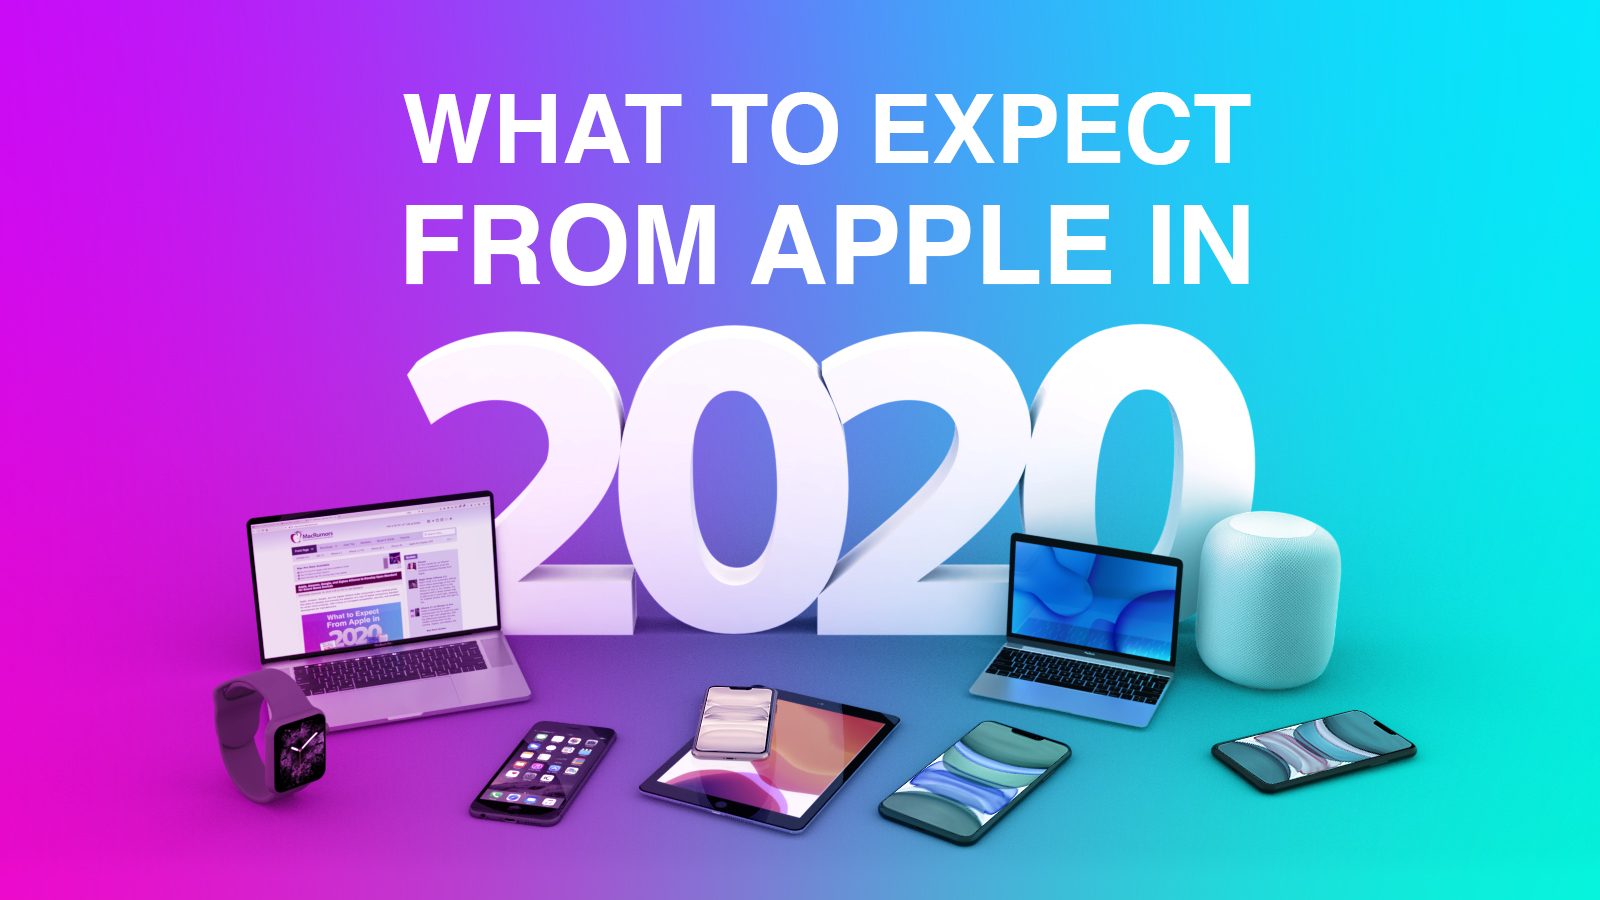 Product 2020. Apple 2020. Apple New products. Реклама АПЛ 2020. Apples 2020 movie.